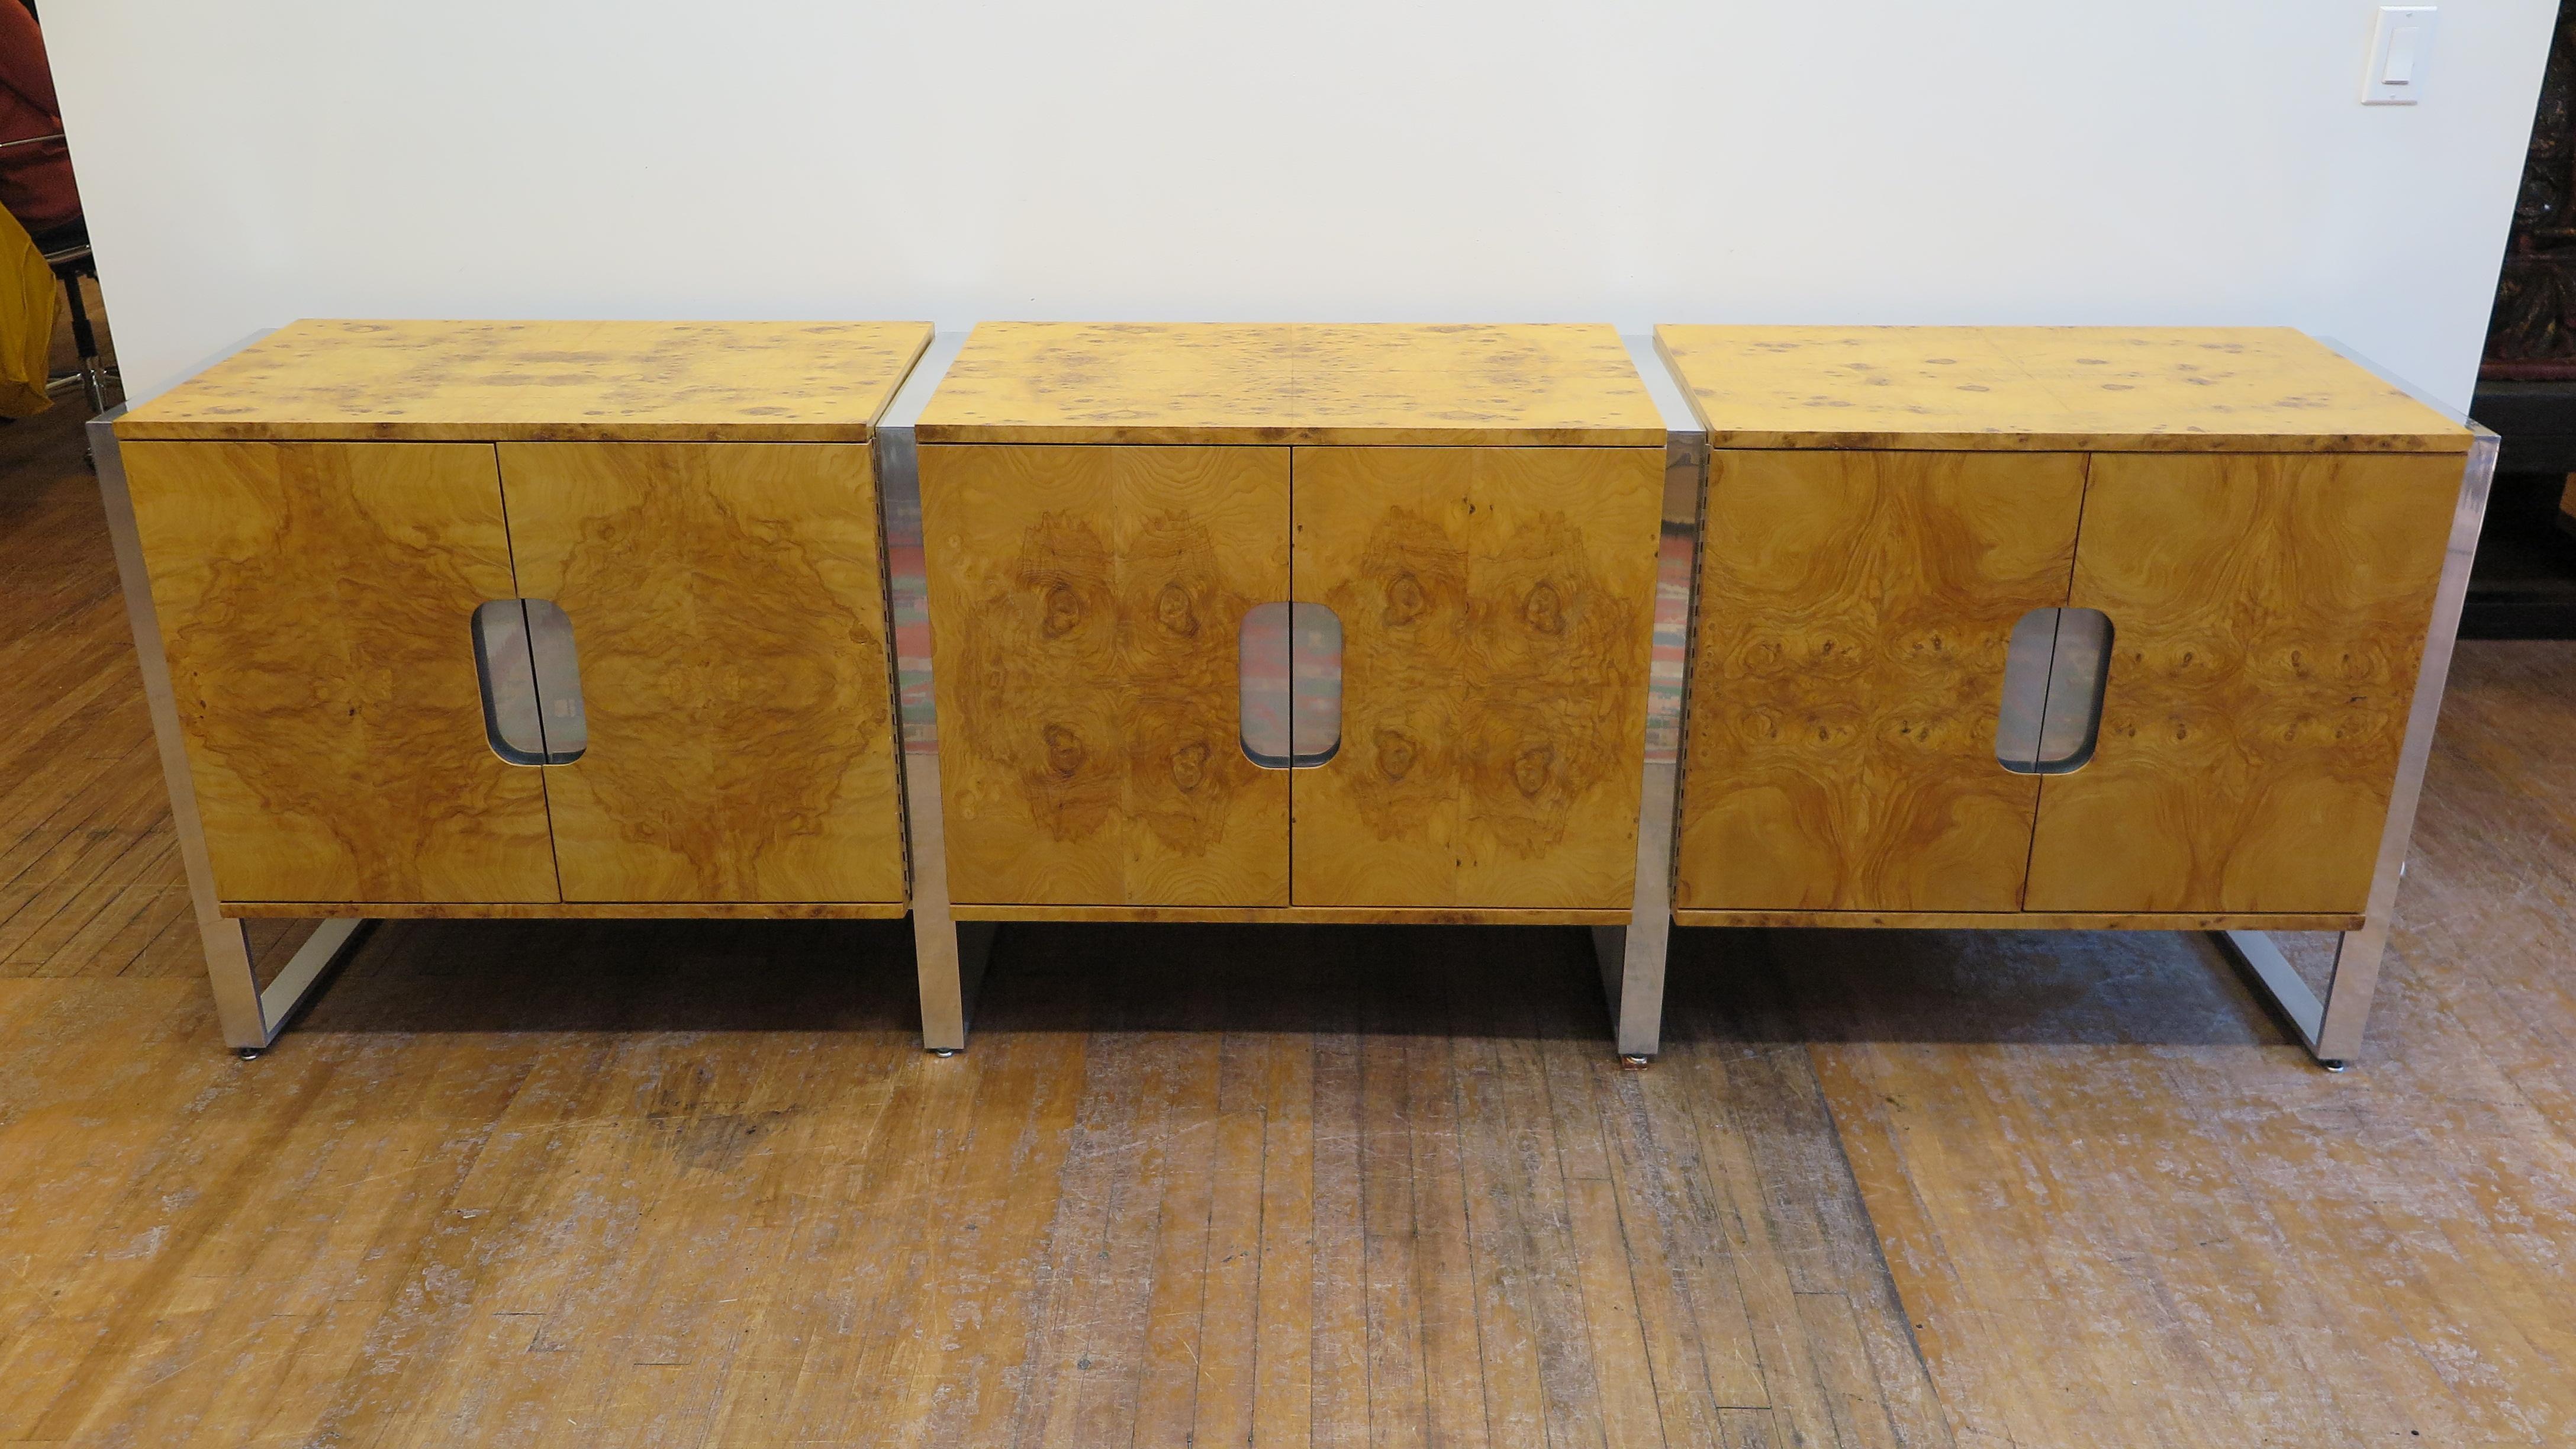 Pace collection sideboard credenza. Walnut burl wood veneered cabinets with shelving set on chrome steel framed legs. In very good condition. Large sideboard with excellent storage. American Modern CA 1970.